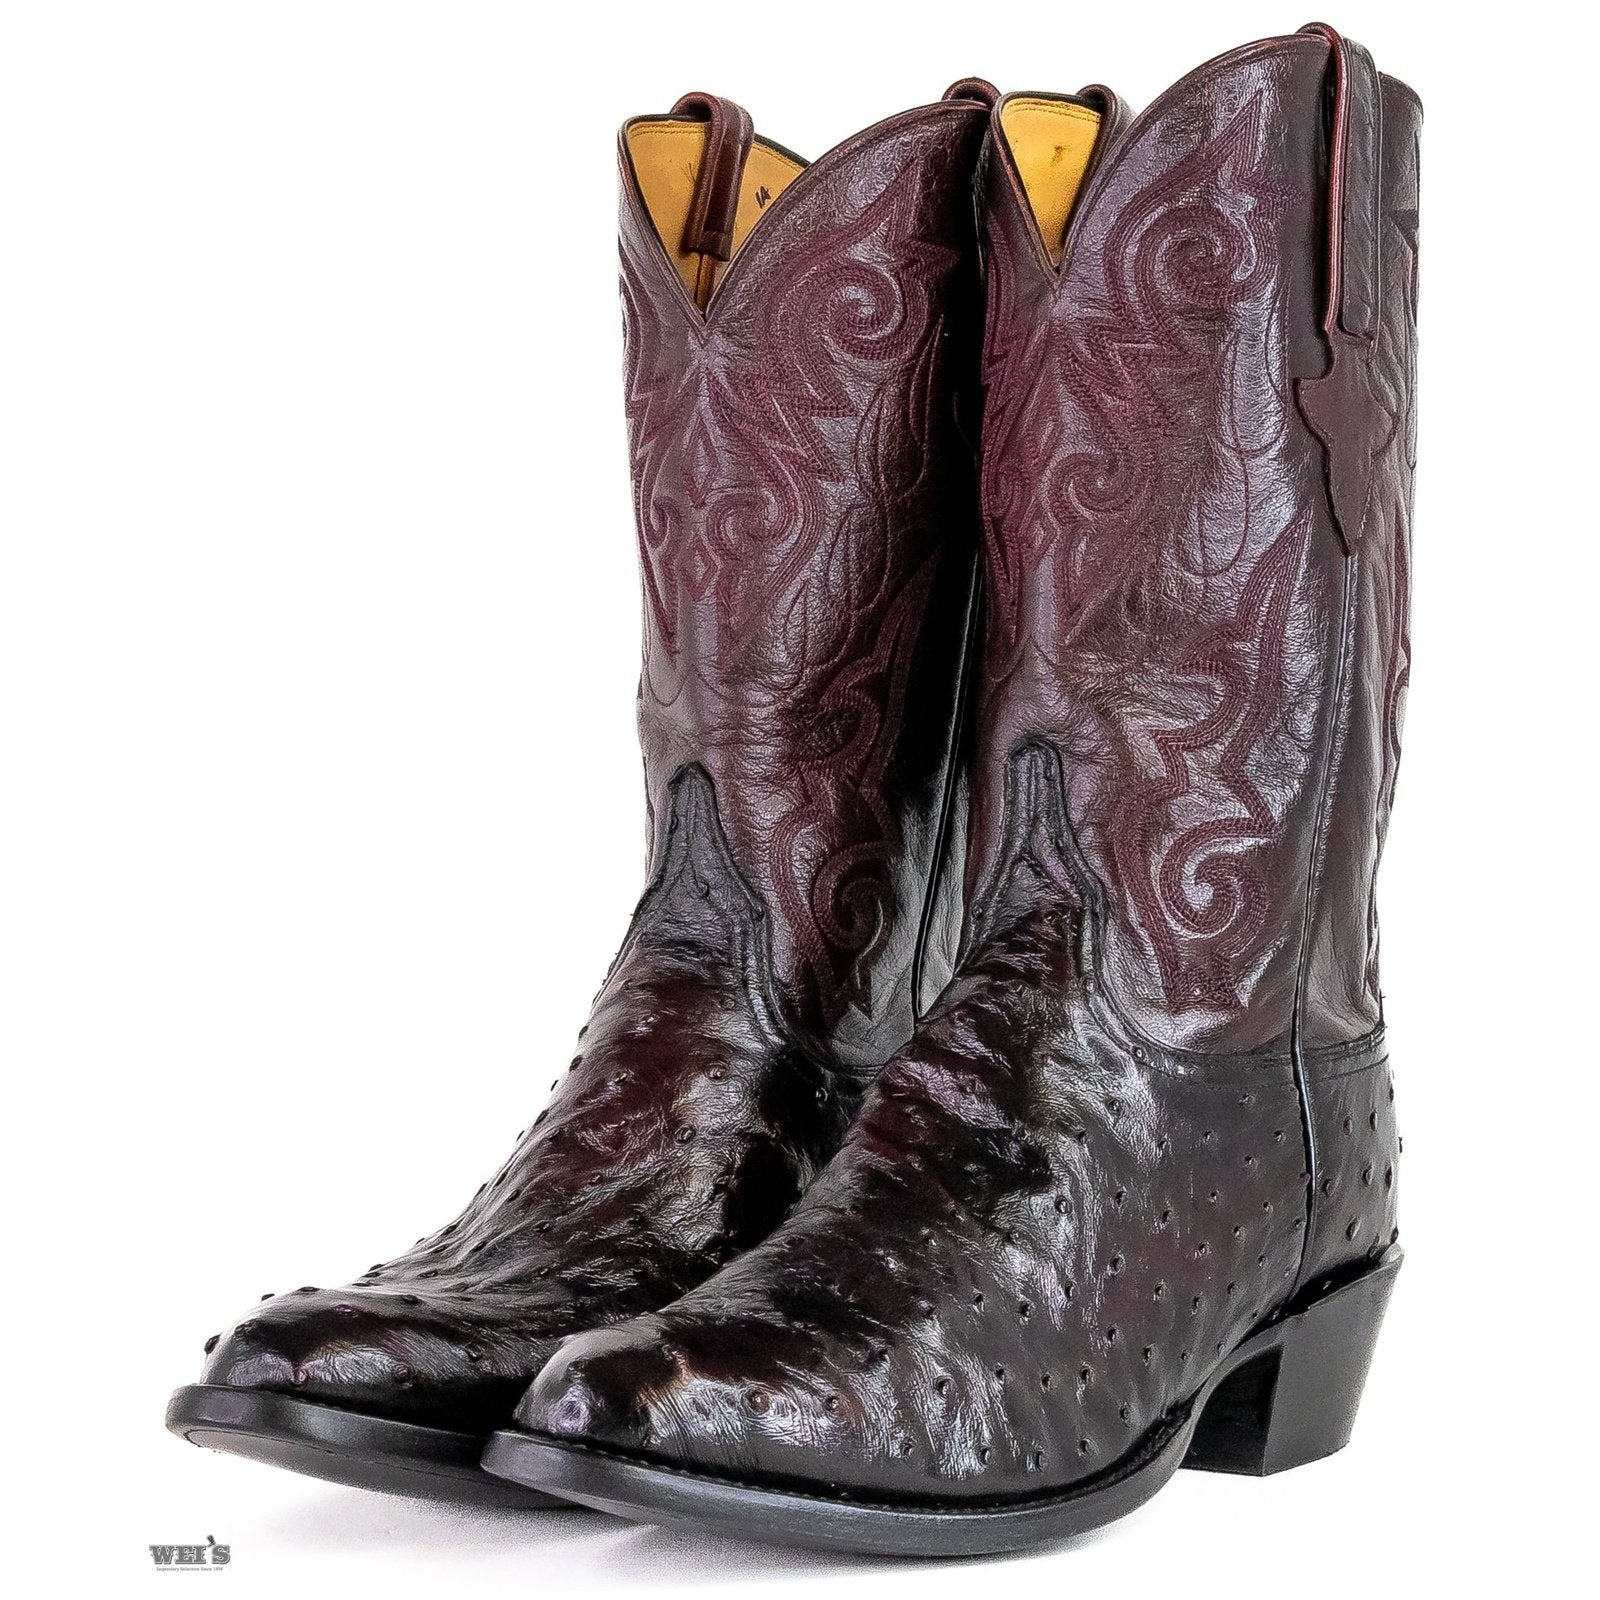 Lucchese Men's Cowboy Boots 14" Exotic Ostrich/Goat E2019.64 - Lucchese Boots